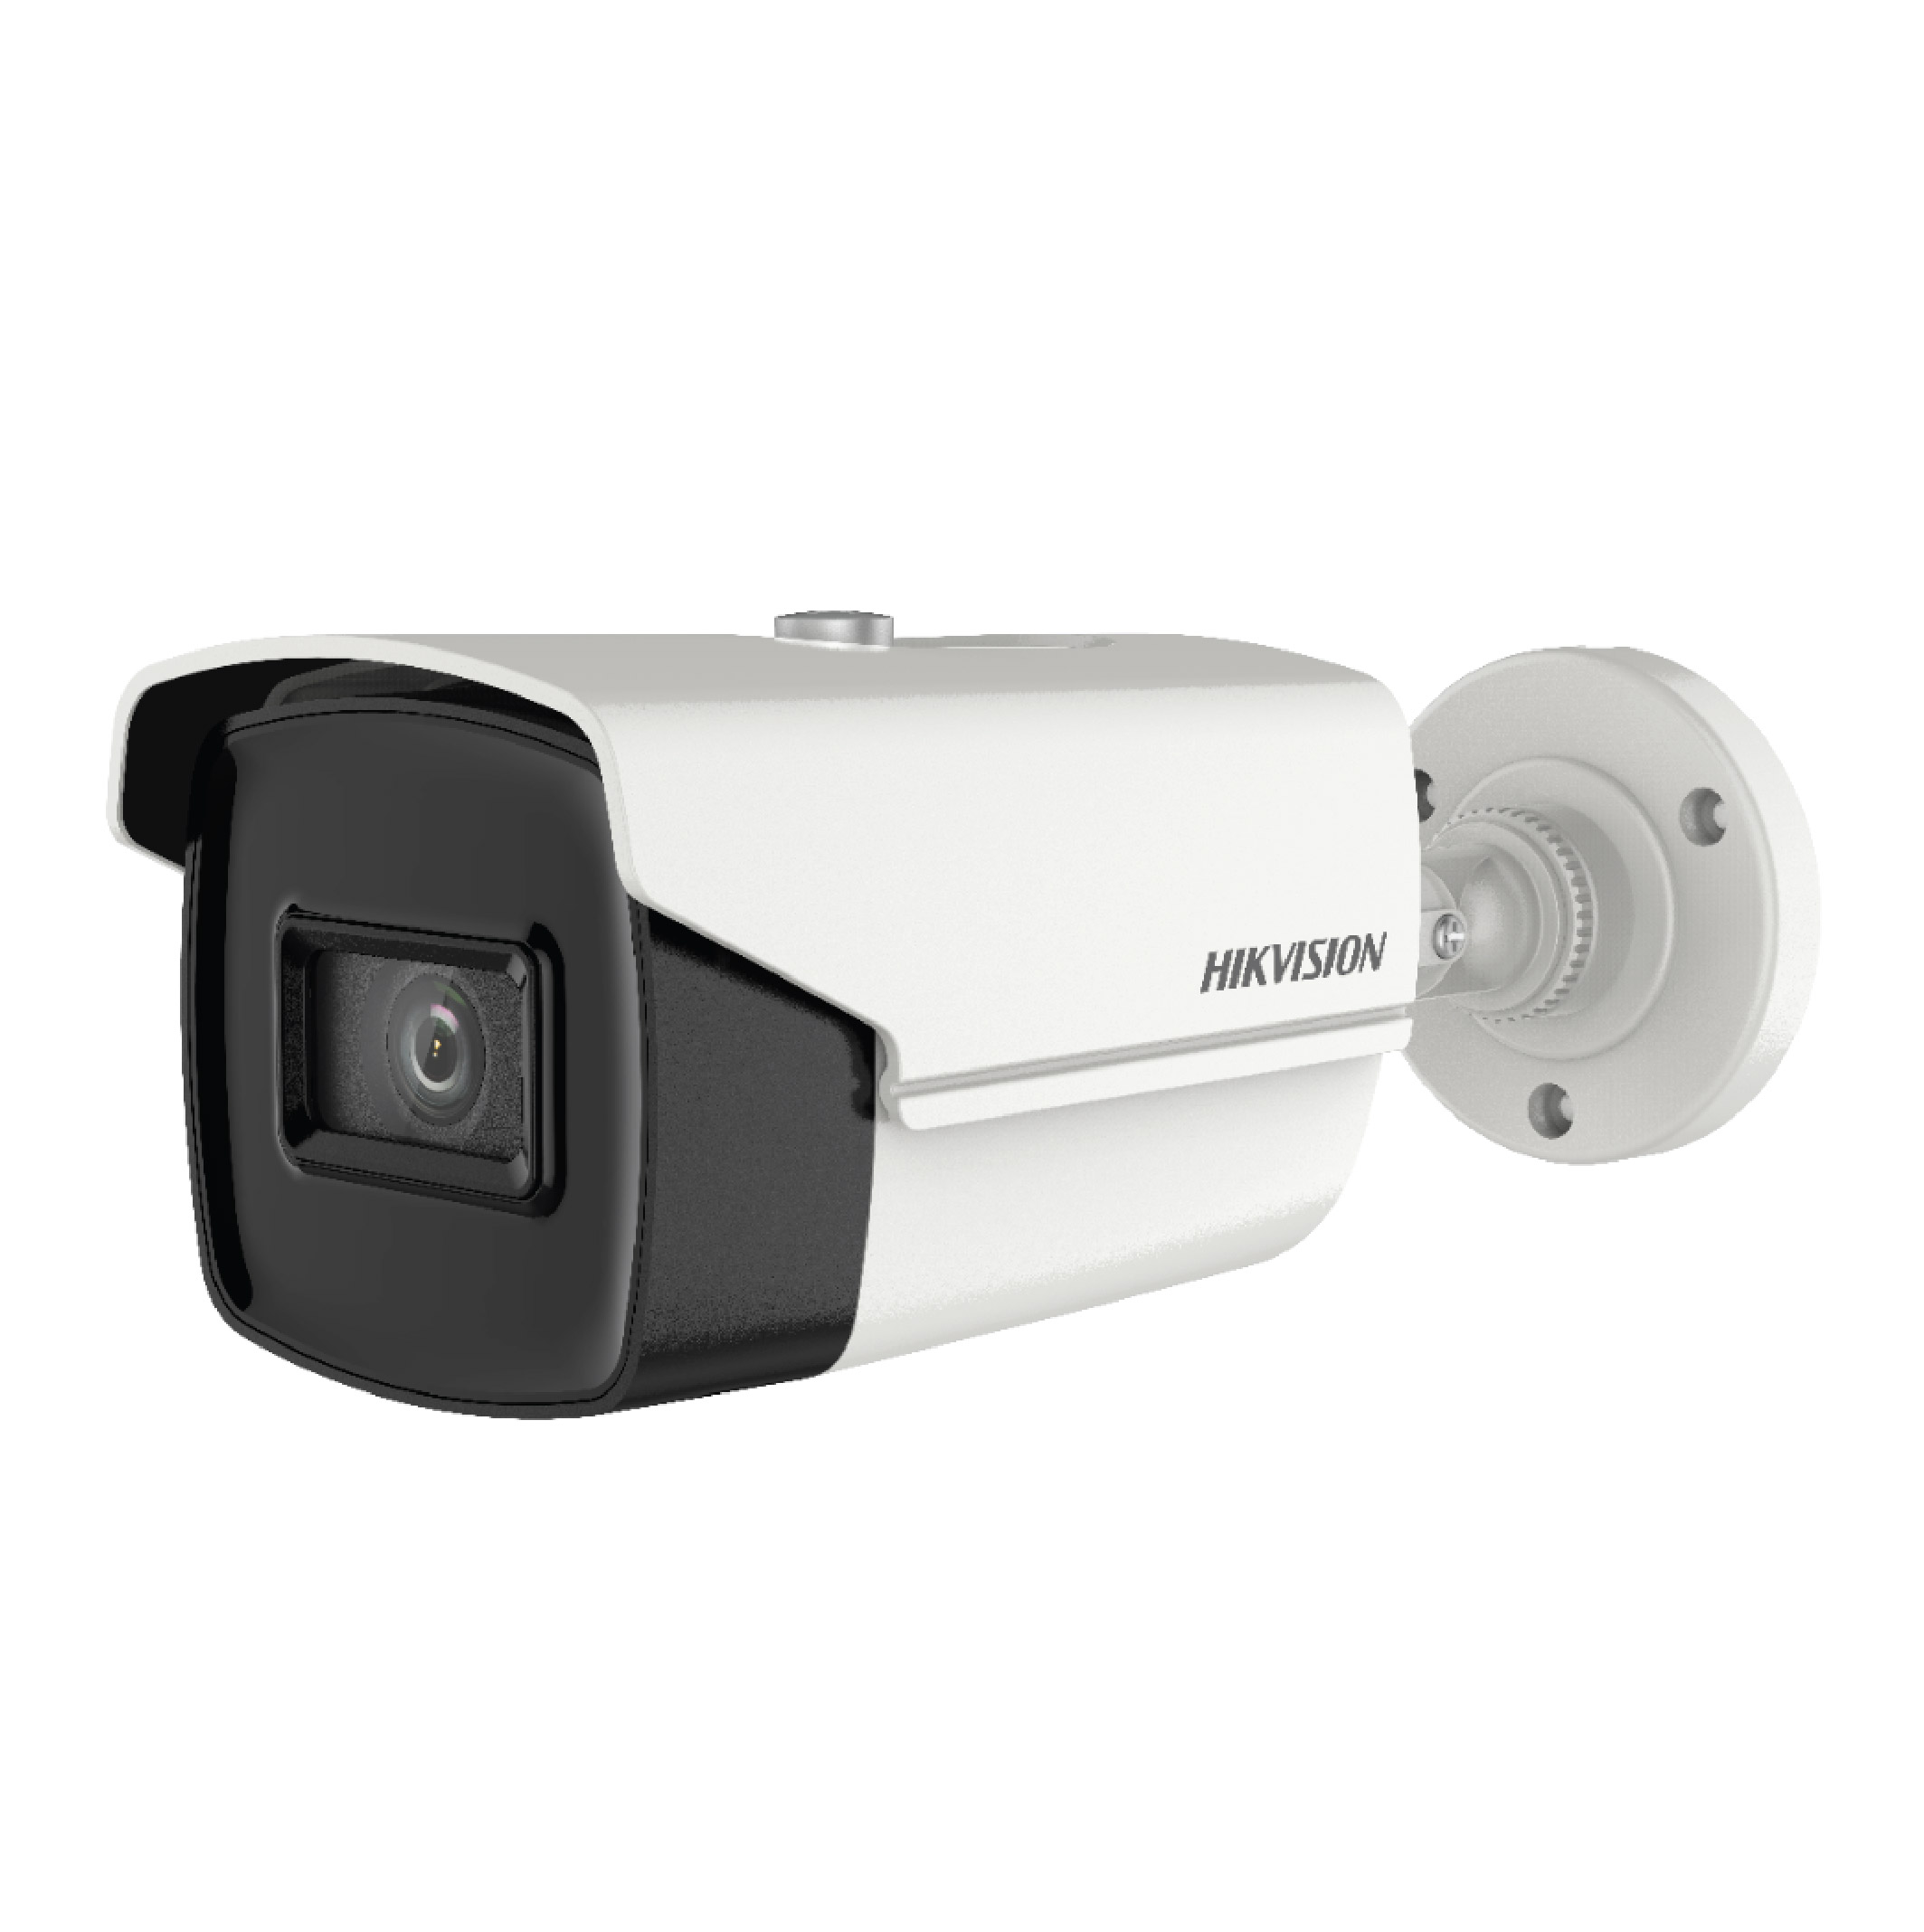 HIKVISION DS-2CE16D3T-IT3F Turbo HD Camera